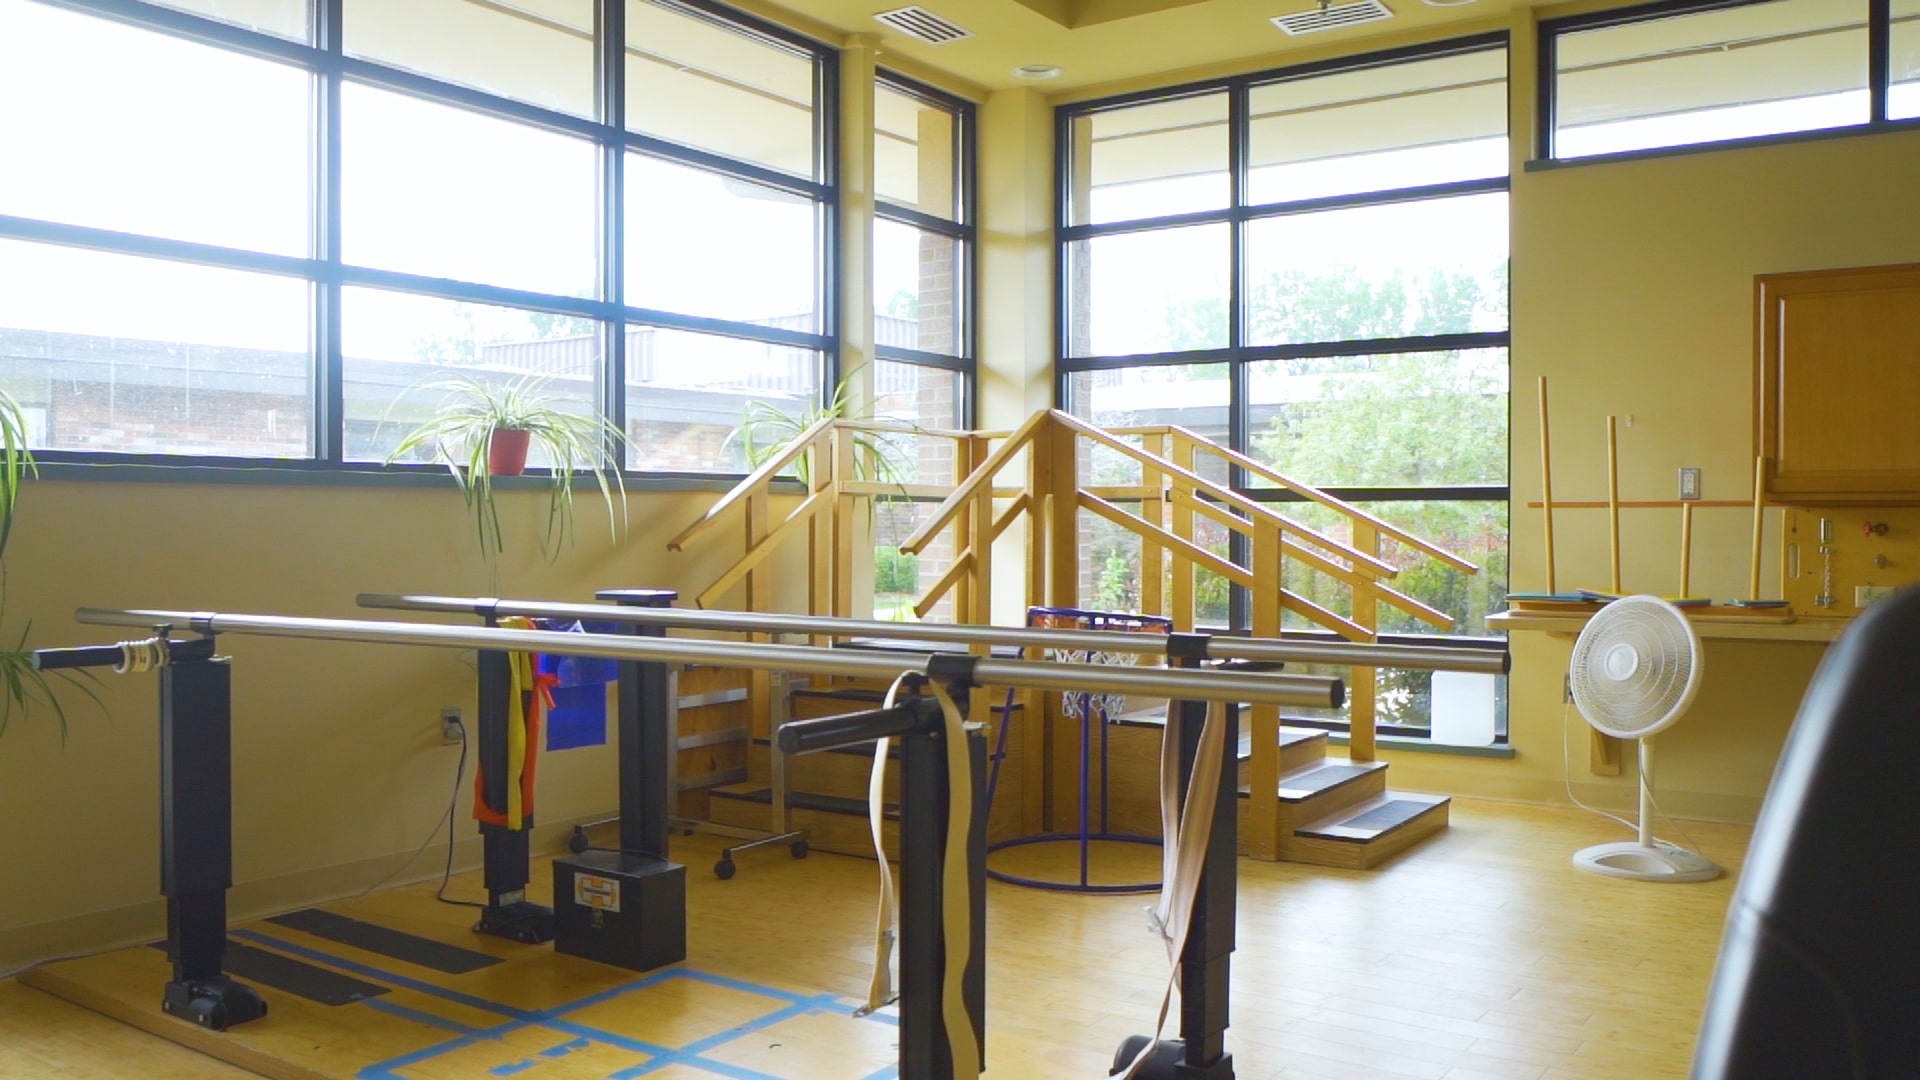 Gym with parallel bars and therapy ladder.